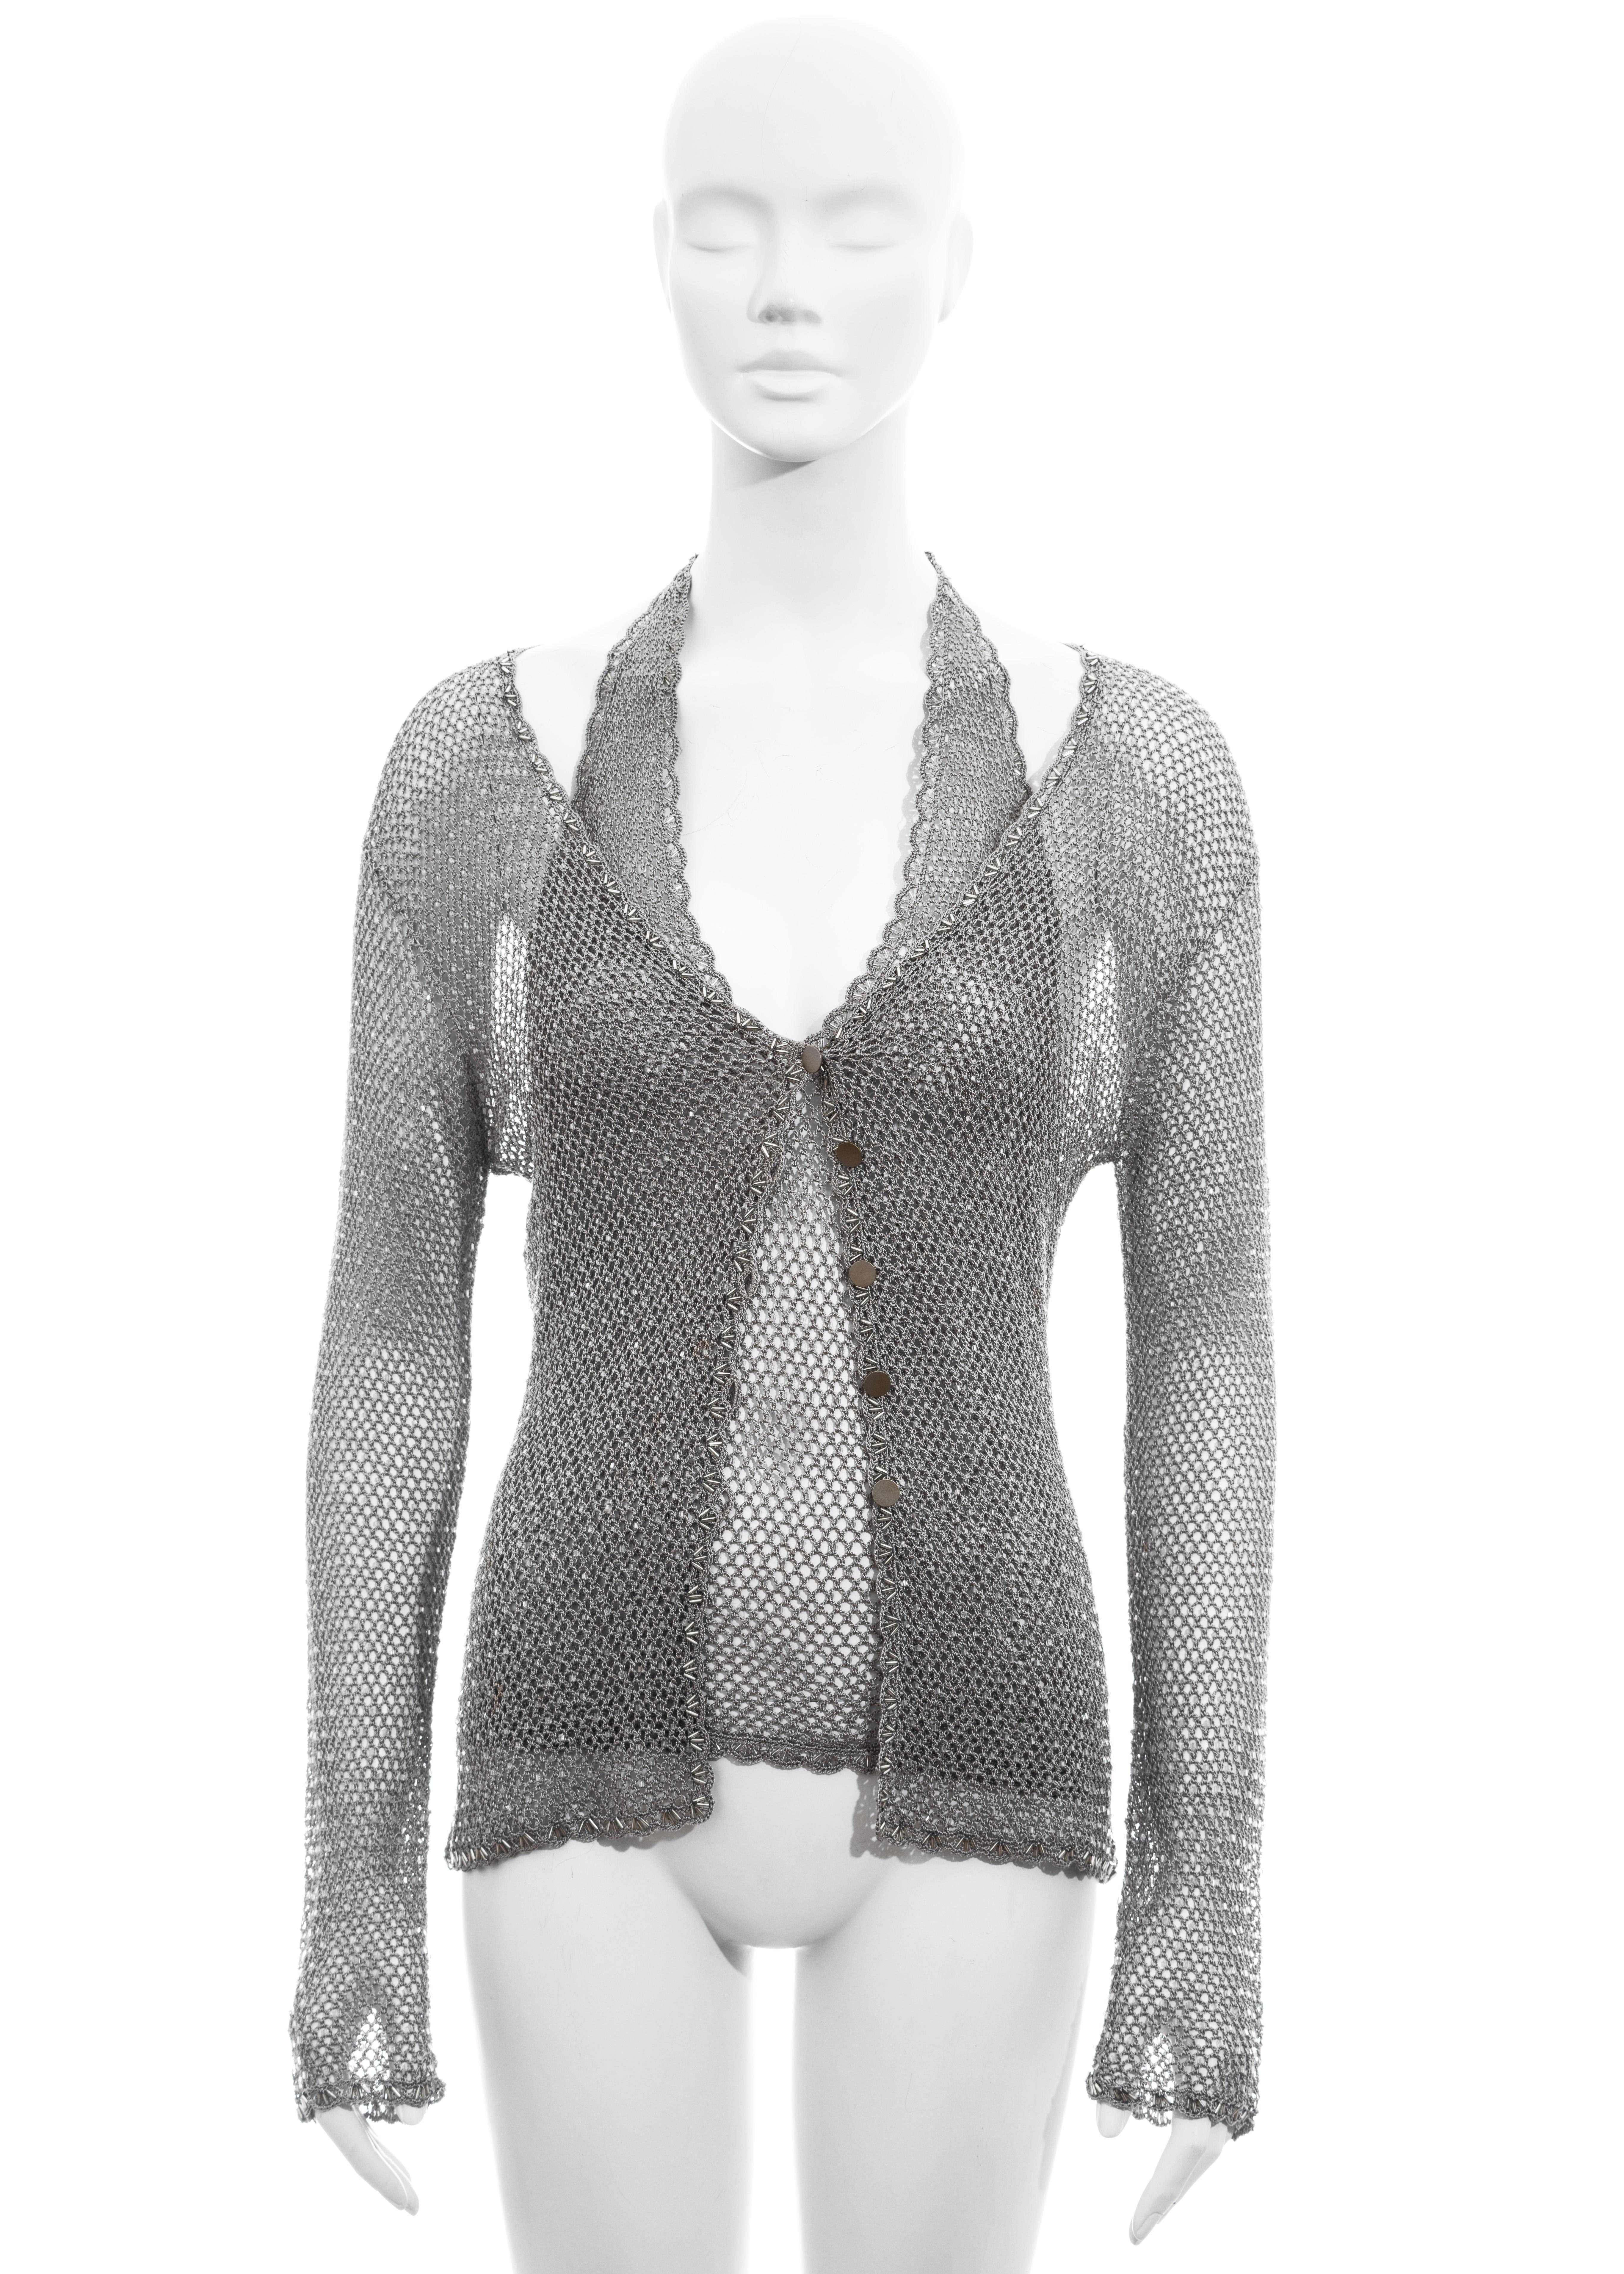 ▪.Roberto Cavalli silver crochet knit two piece set
▪ 100% Viscose 
▪ Clear beading throughout 
▪ Long sleeve button-up cardigan
▪ Halter-neck vest
▪ Size Small
▪ Spring-Summer 2001
